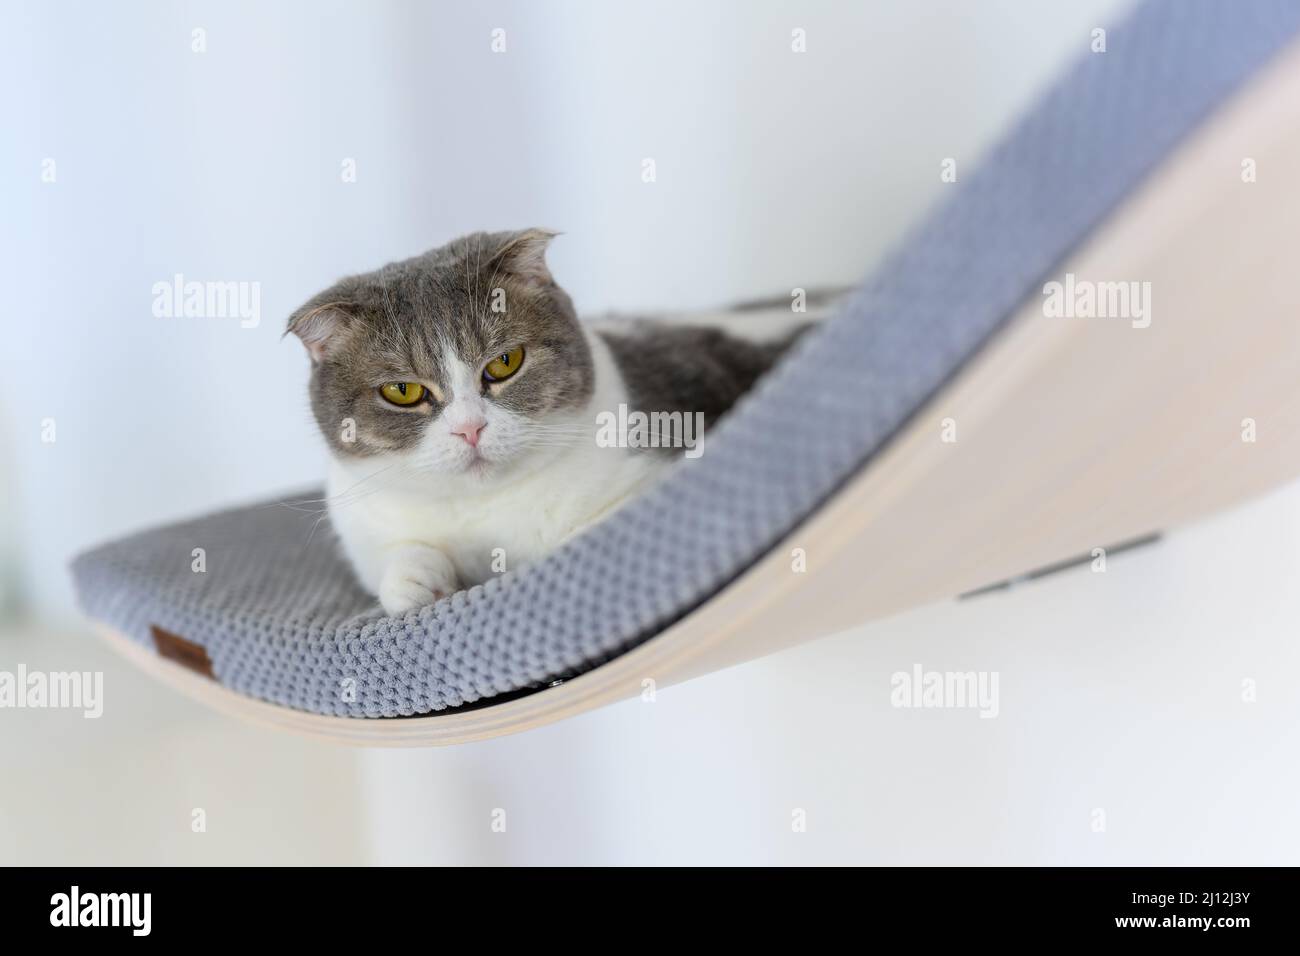 A cat sits on a curved shelf with blue soft cushions, a decorative wall shelf for cats, a gray and white striped Scottish fold cat sitting high lookin Stock Photo